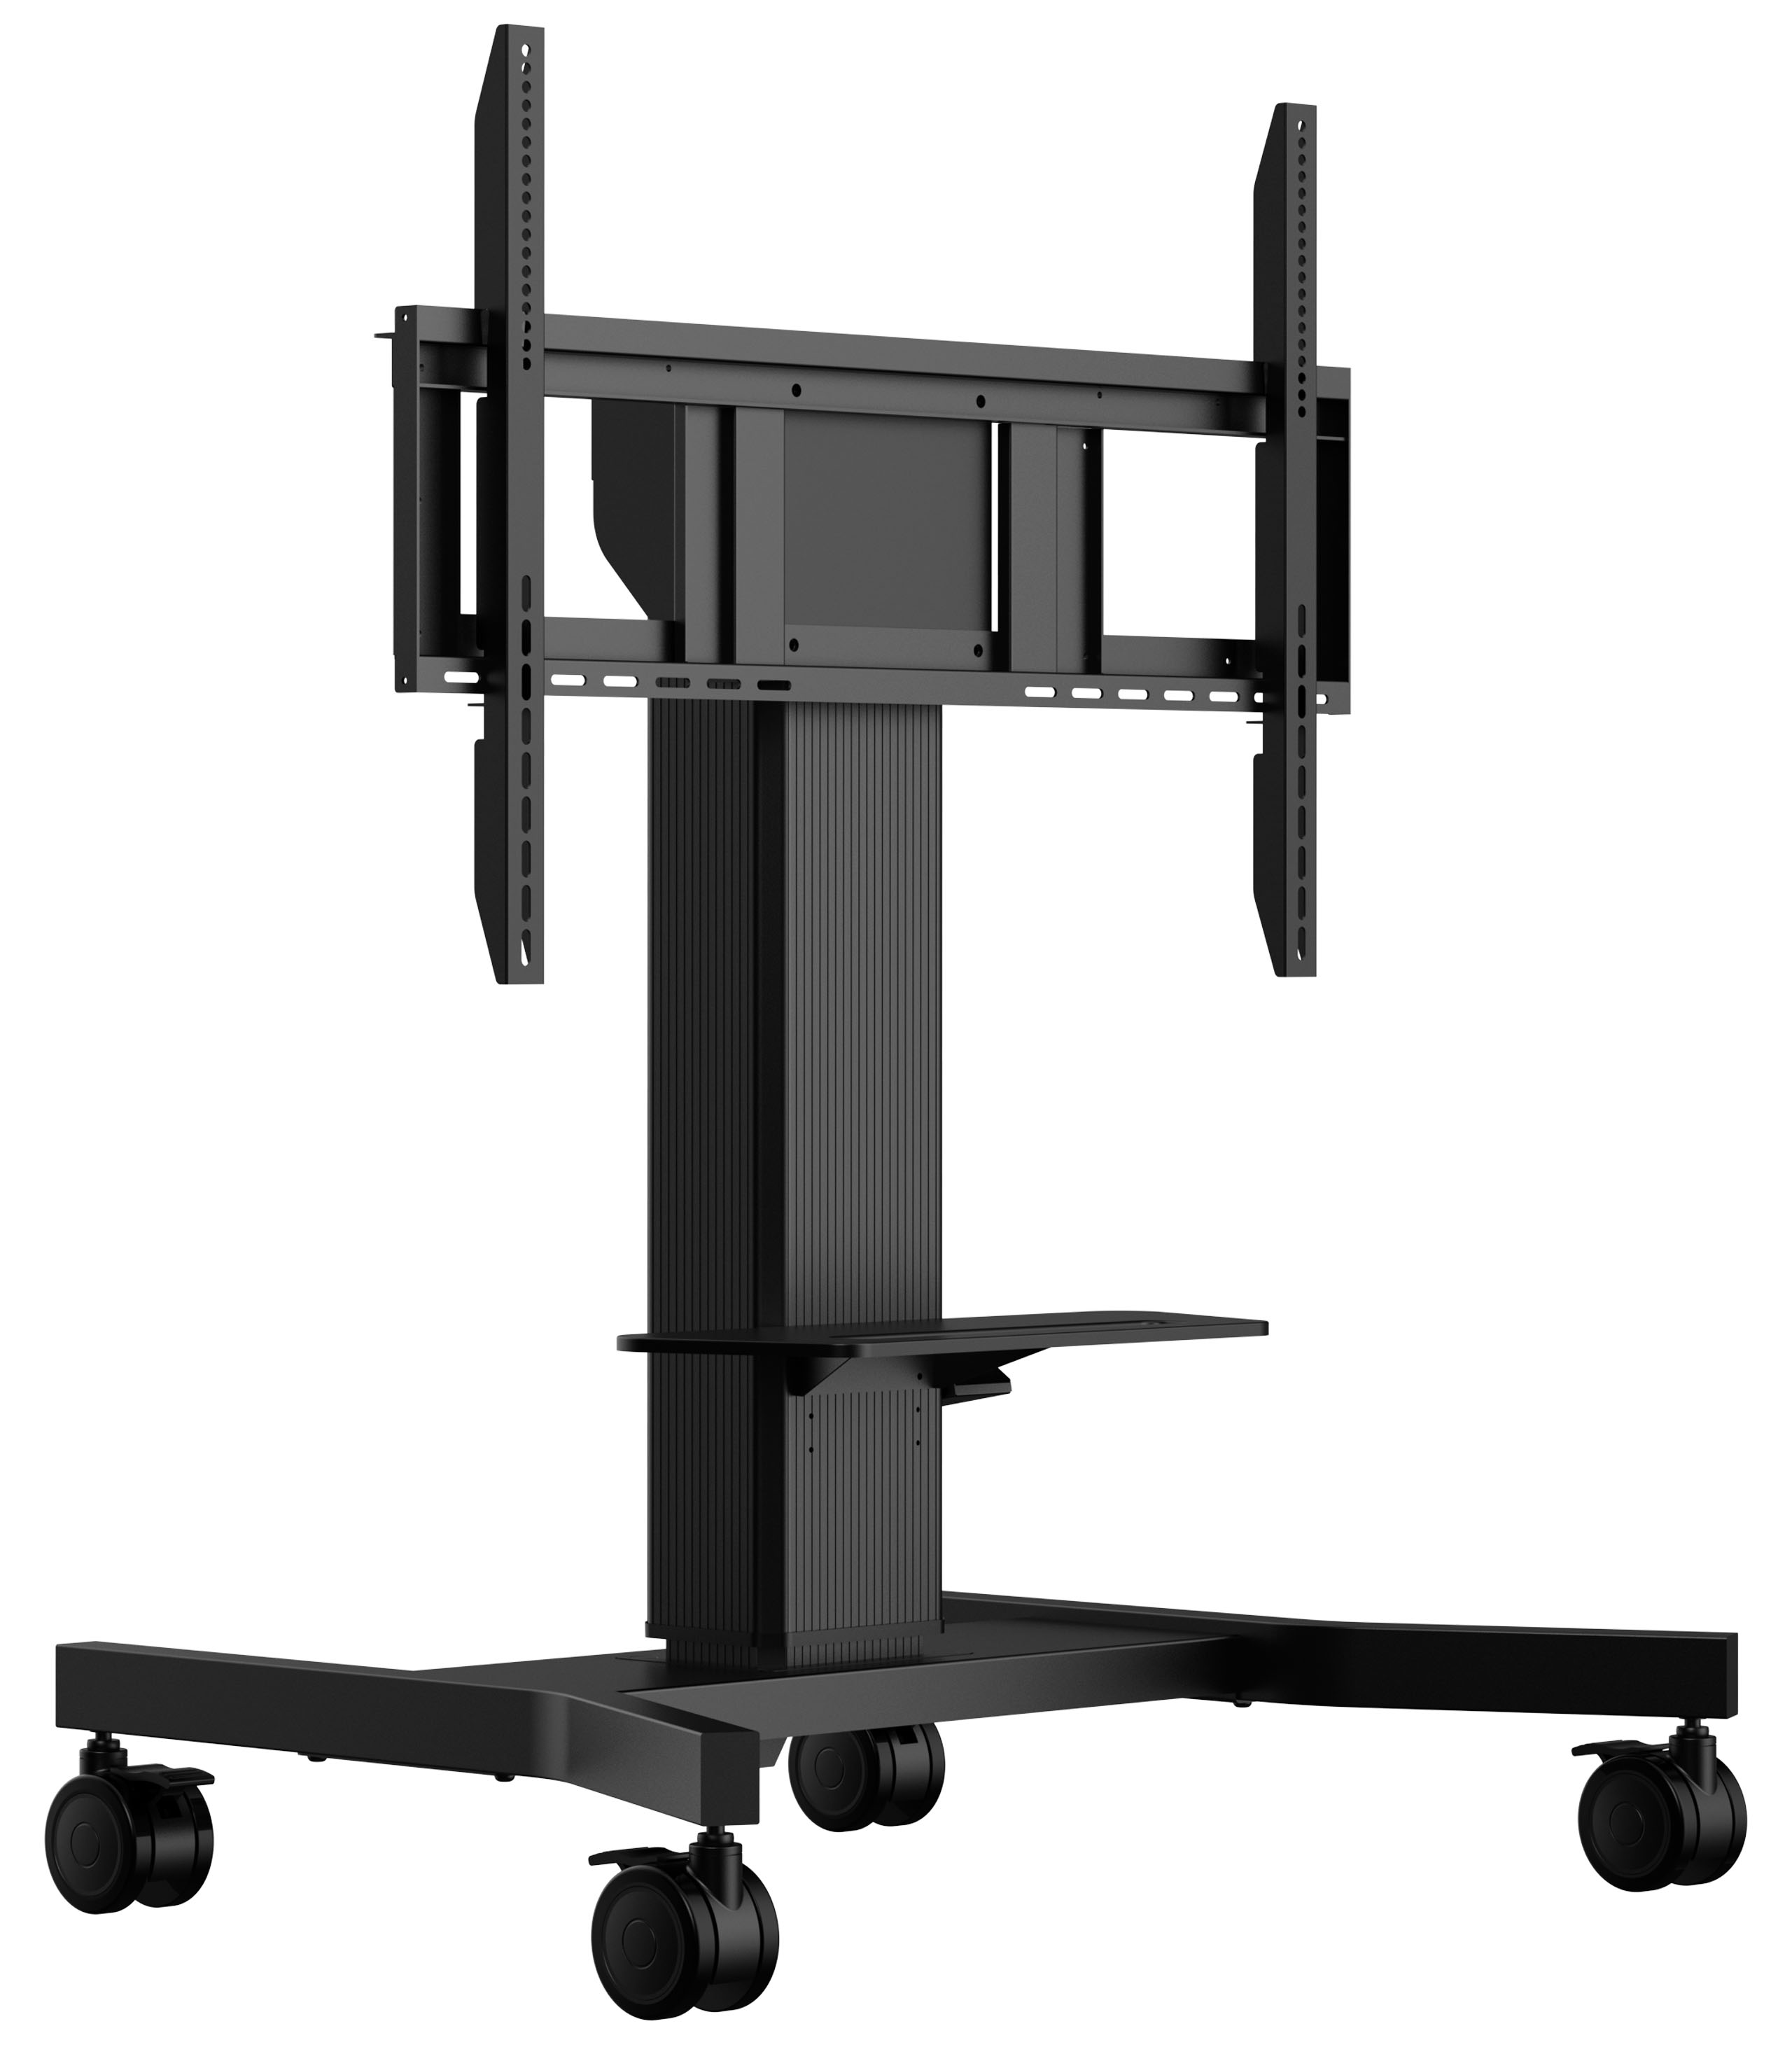 iiyama MD CAR1021-B1 - electric height adjustable trolley - for LFD up to 86 inch - VESA 800x600 mm - up to 100 kg